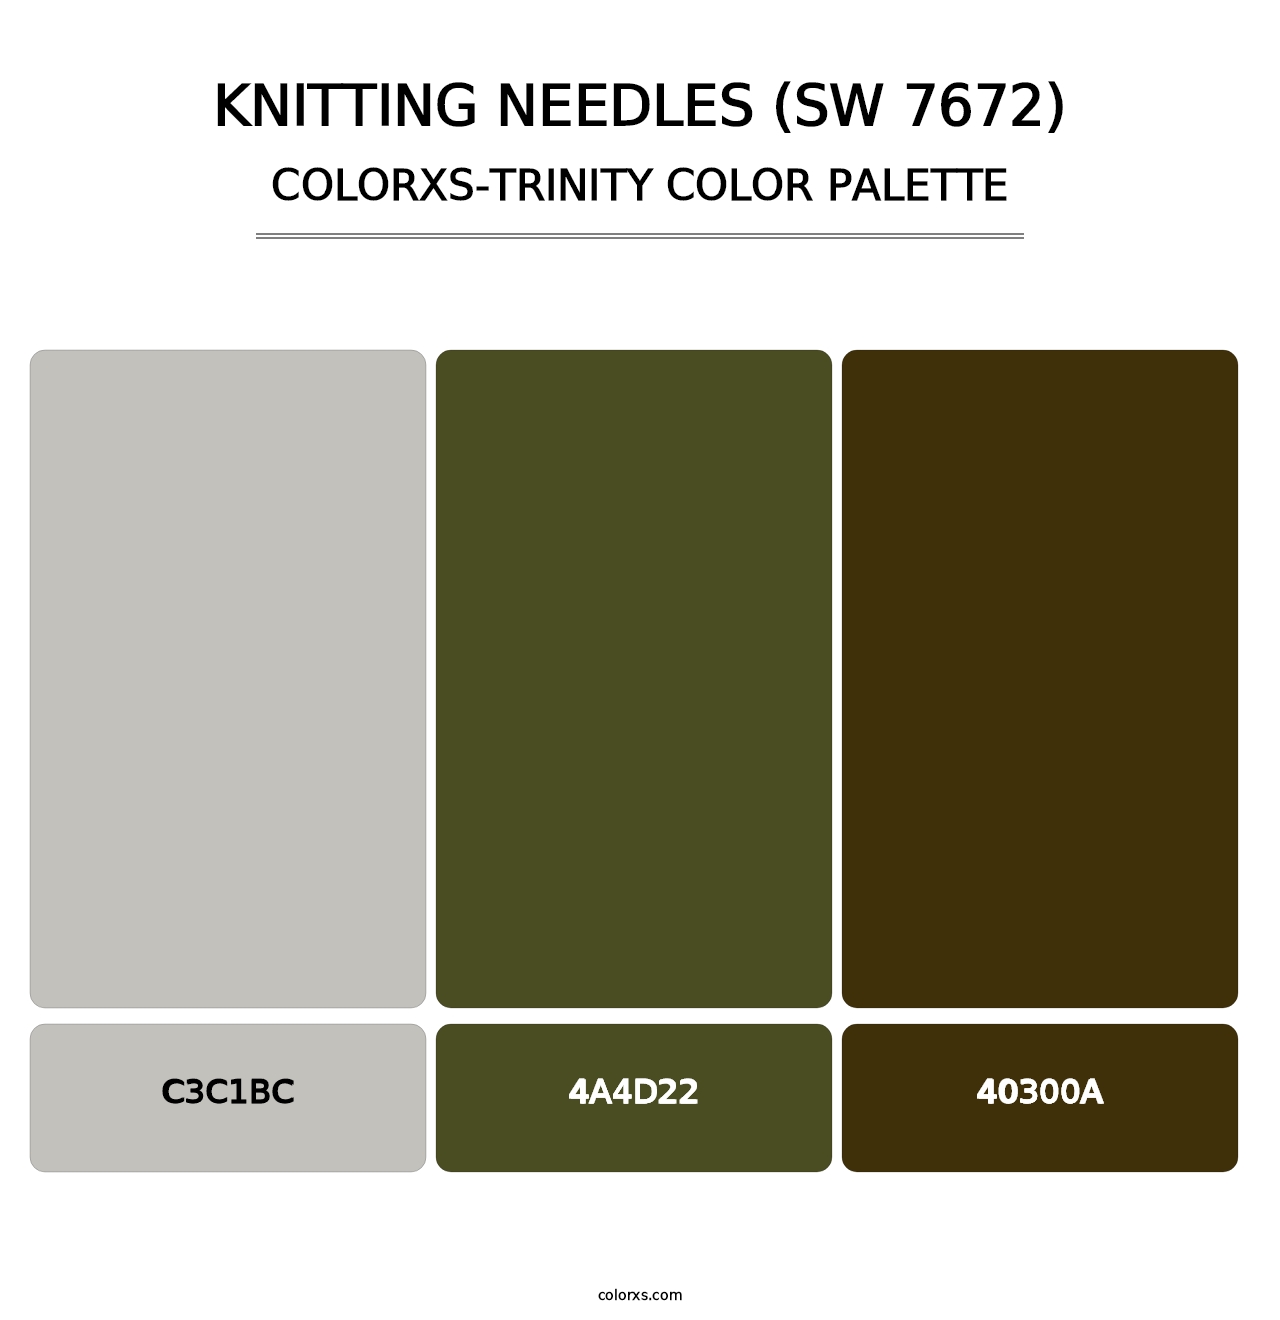 Knitting Needles (SW 7672) - Colorxs Trinity Palette